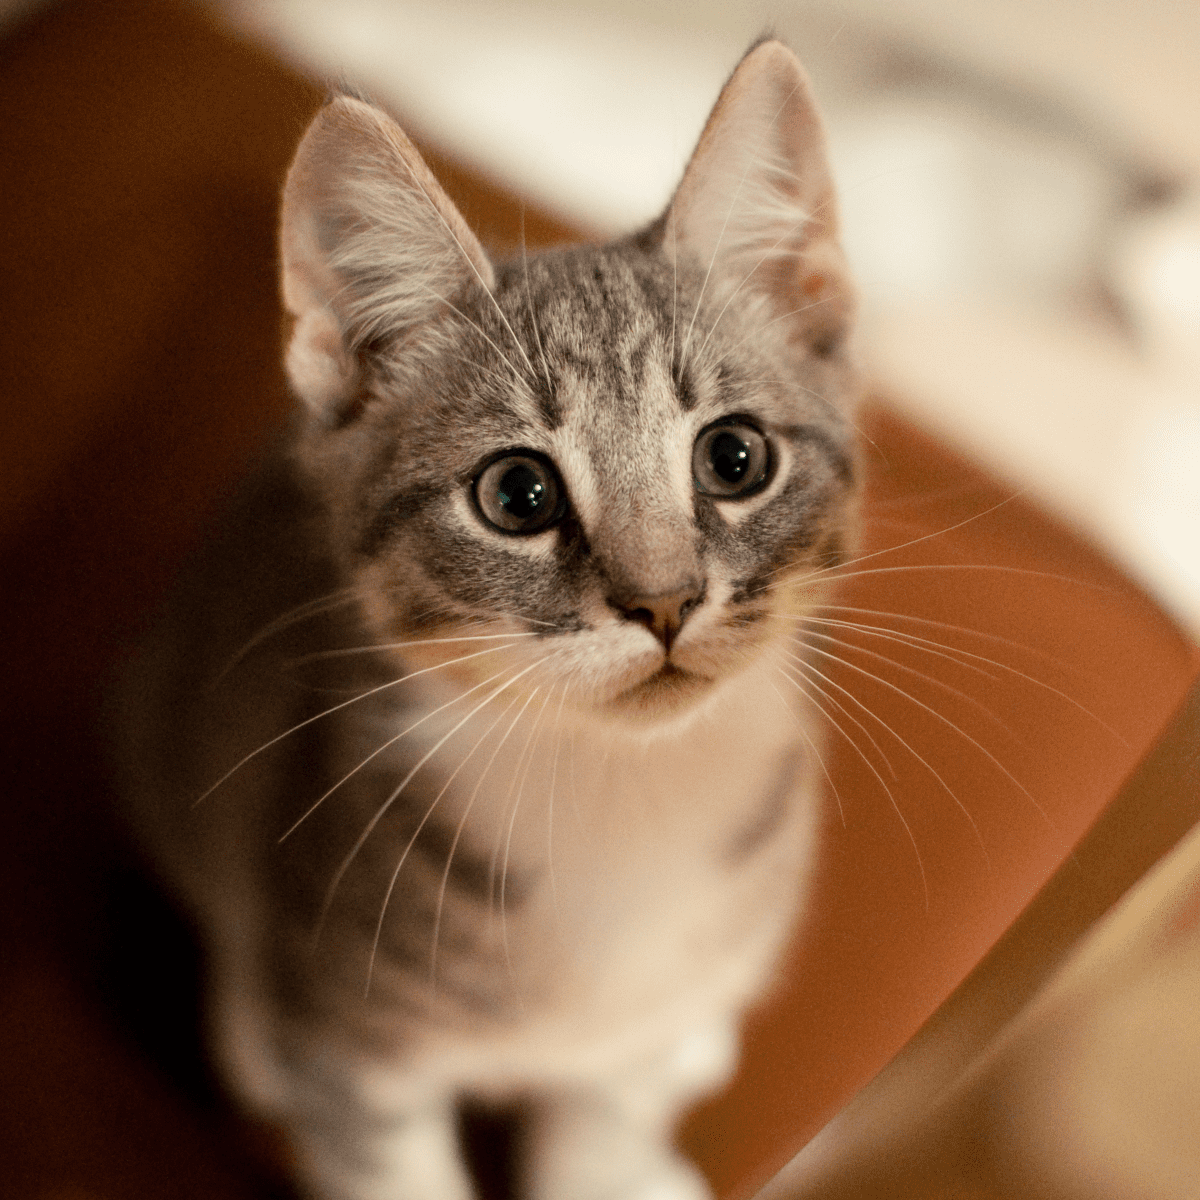 Cute Pet Names for Your New Animal Friend - PetHelpful